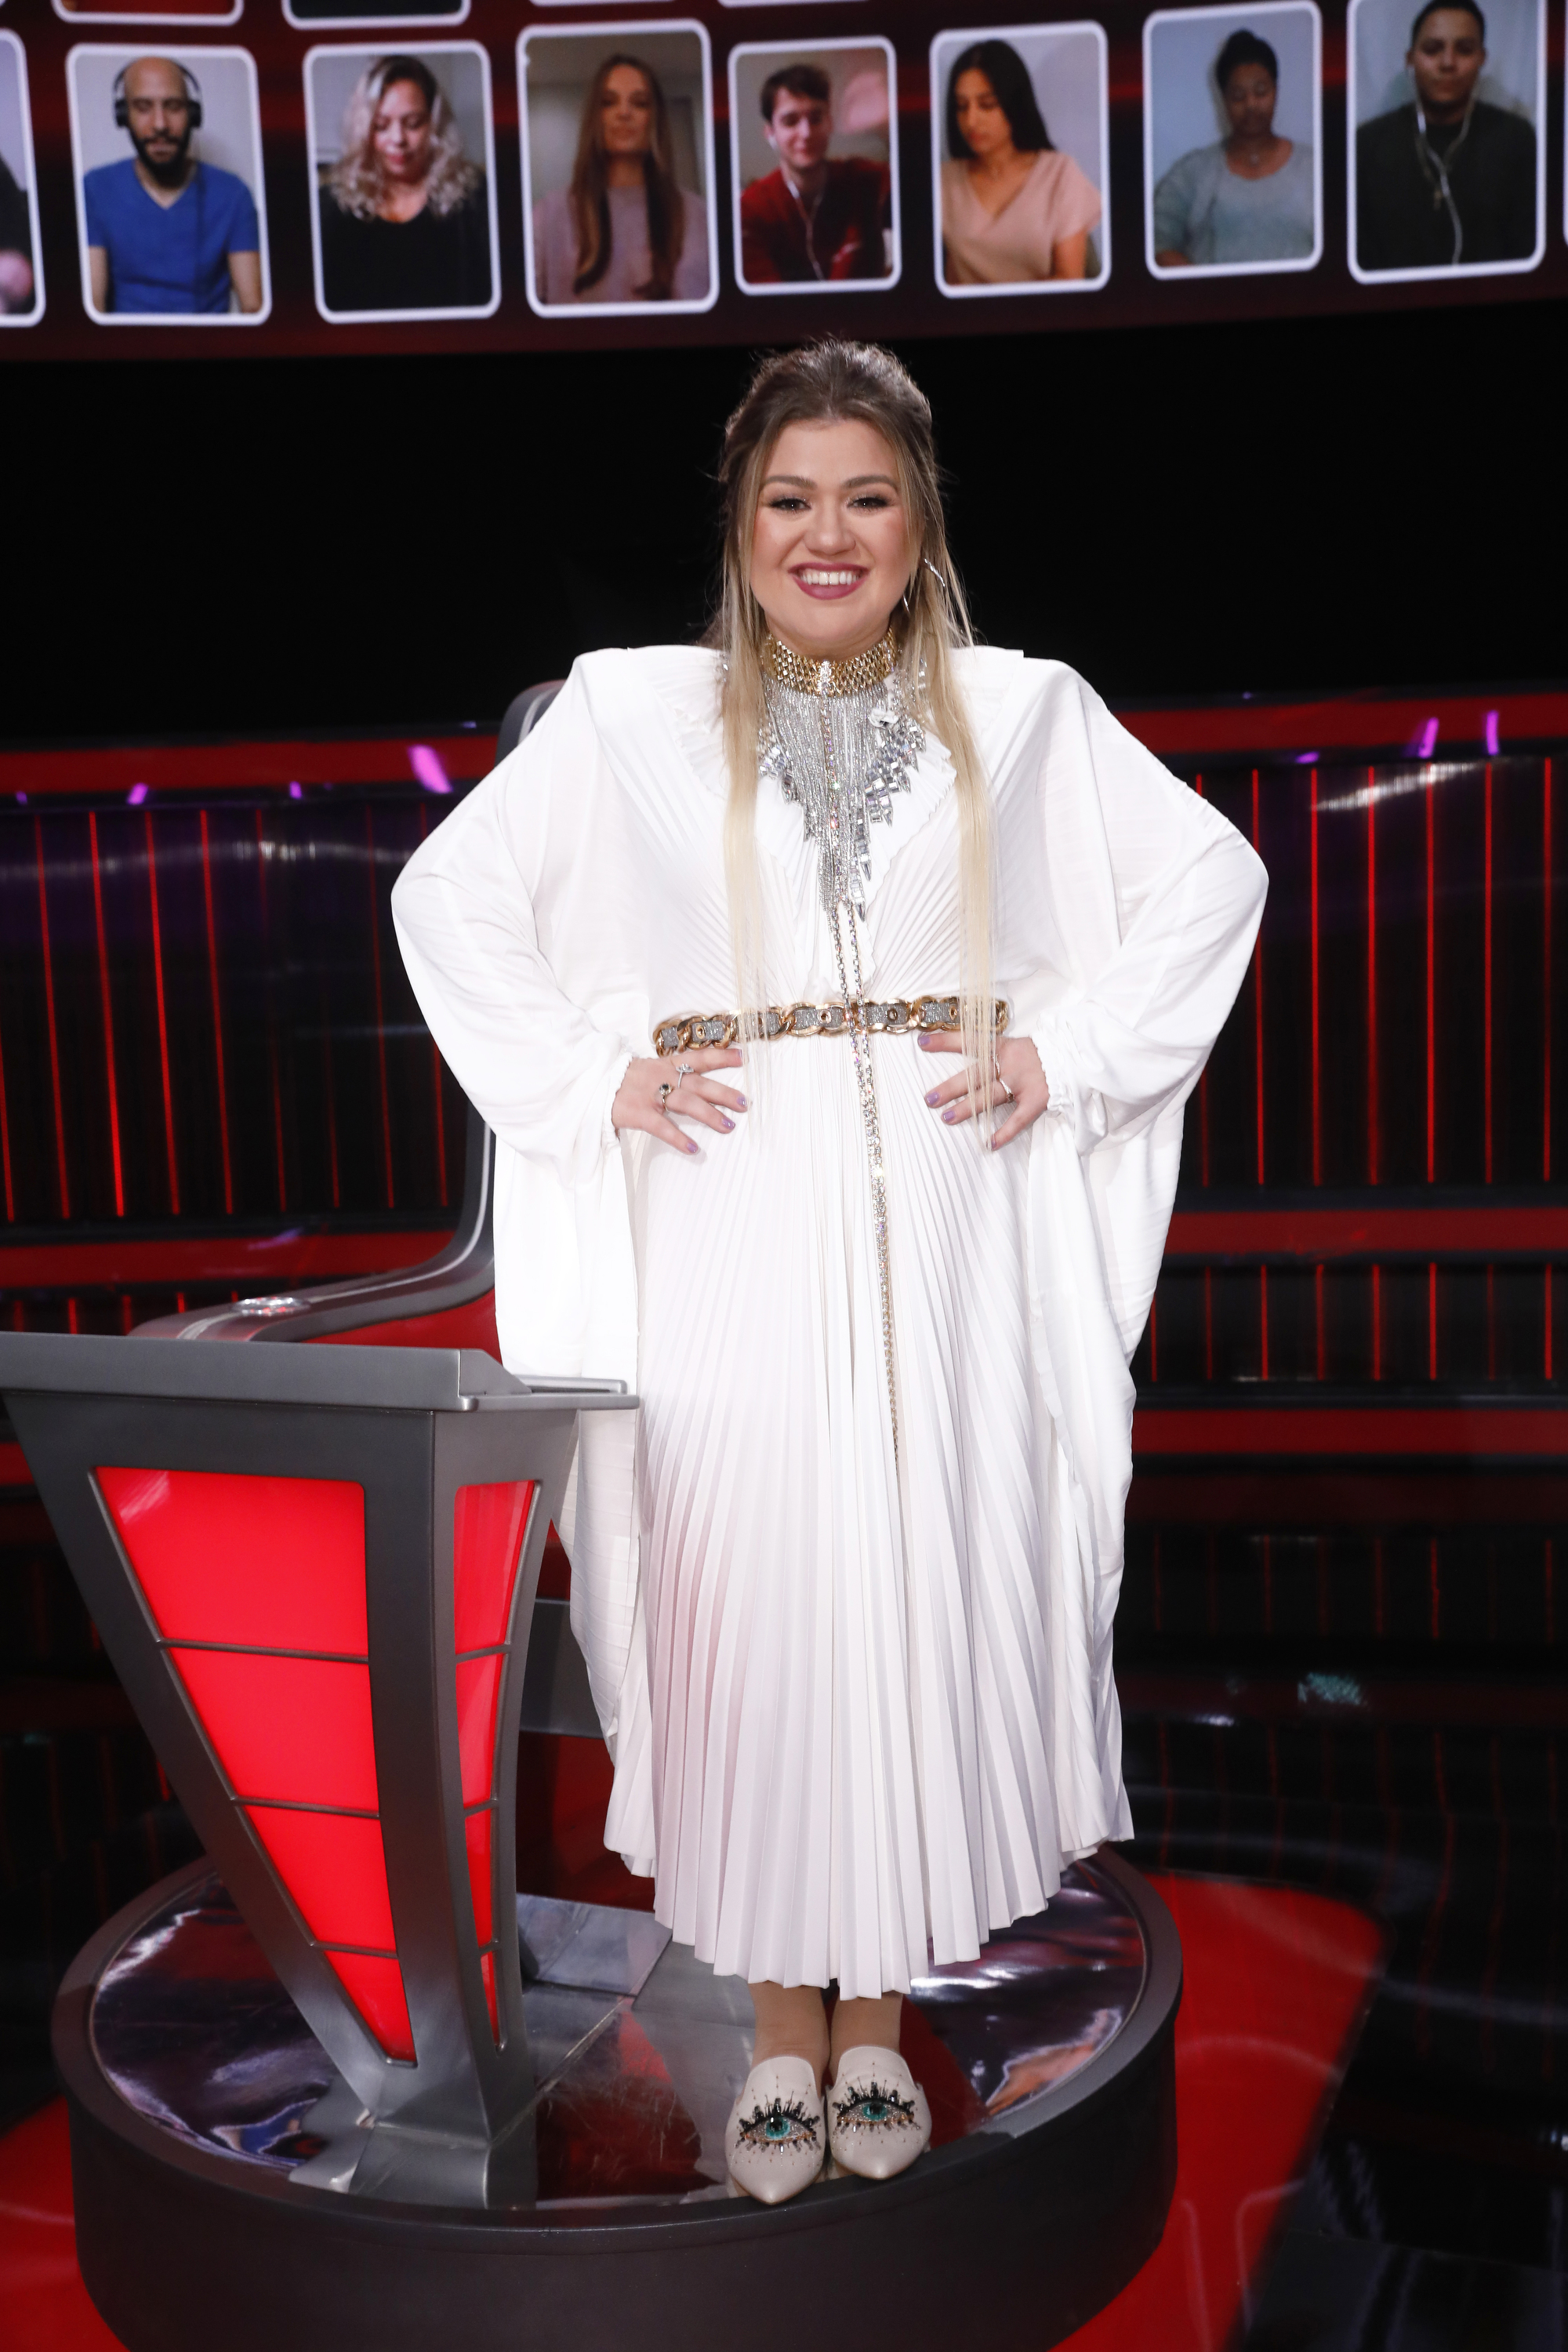 Kelly Clarkson on "The Voice" season 19 on December 7, 2020. | Source: Getty Images